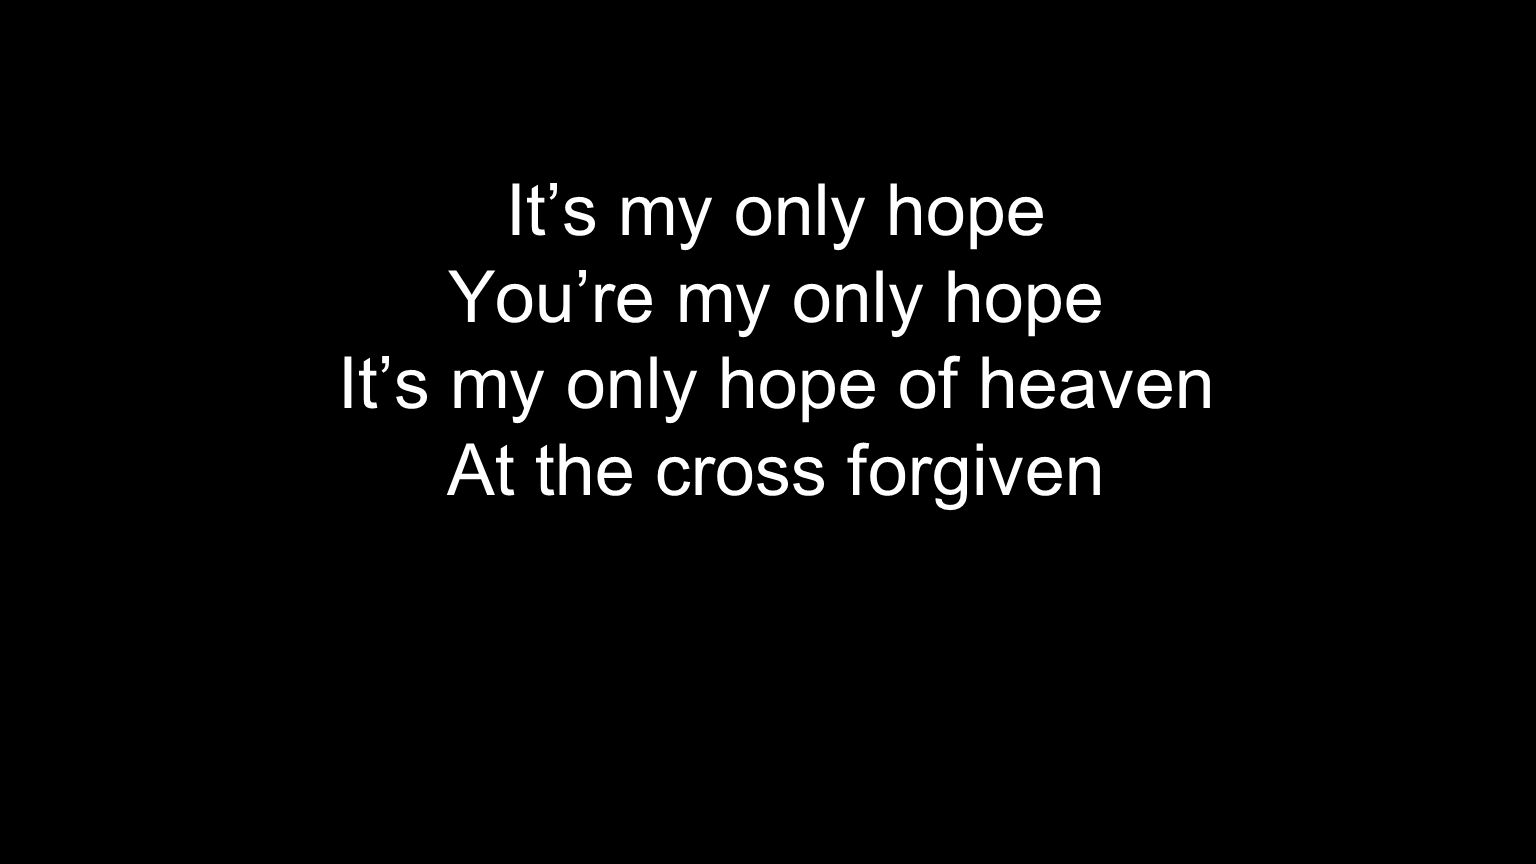 It’s my only hope You’re my only hope It’s my only hope of heaven At the cross forgiven